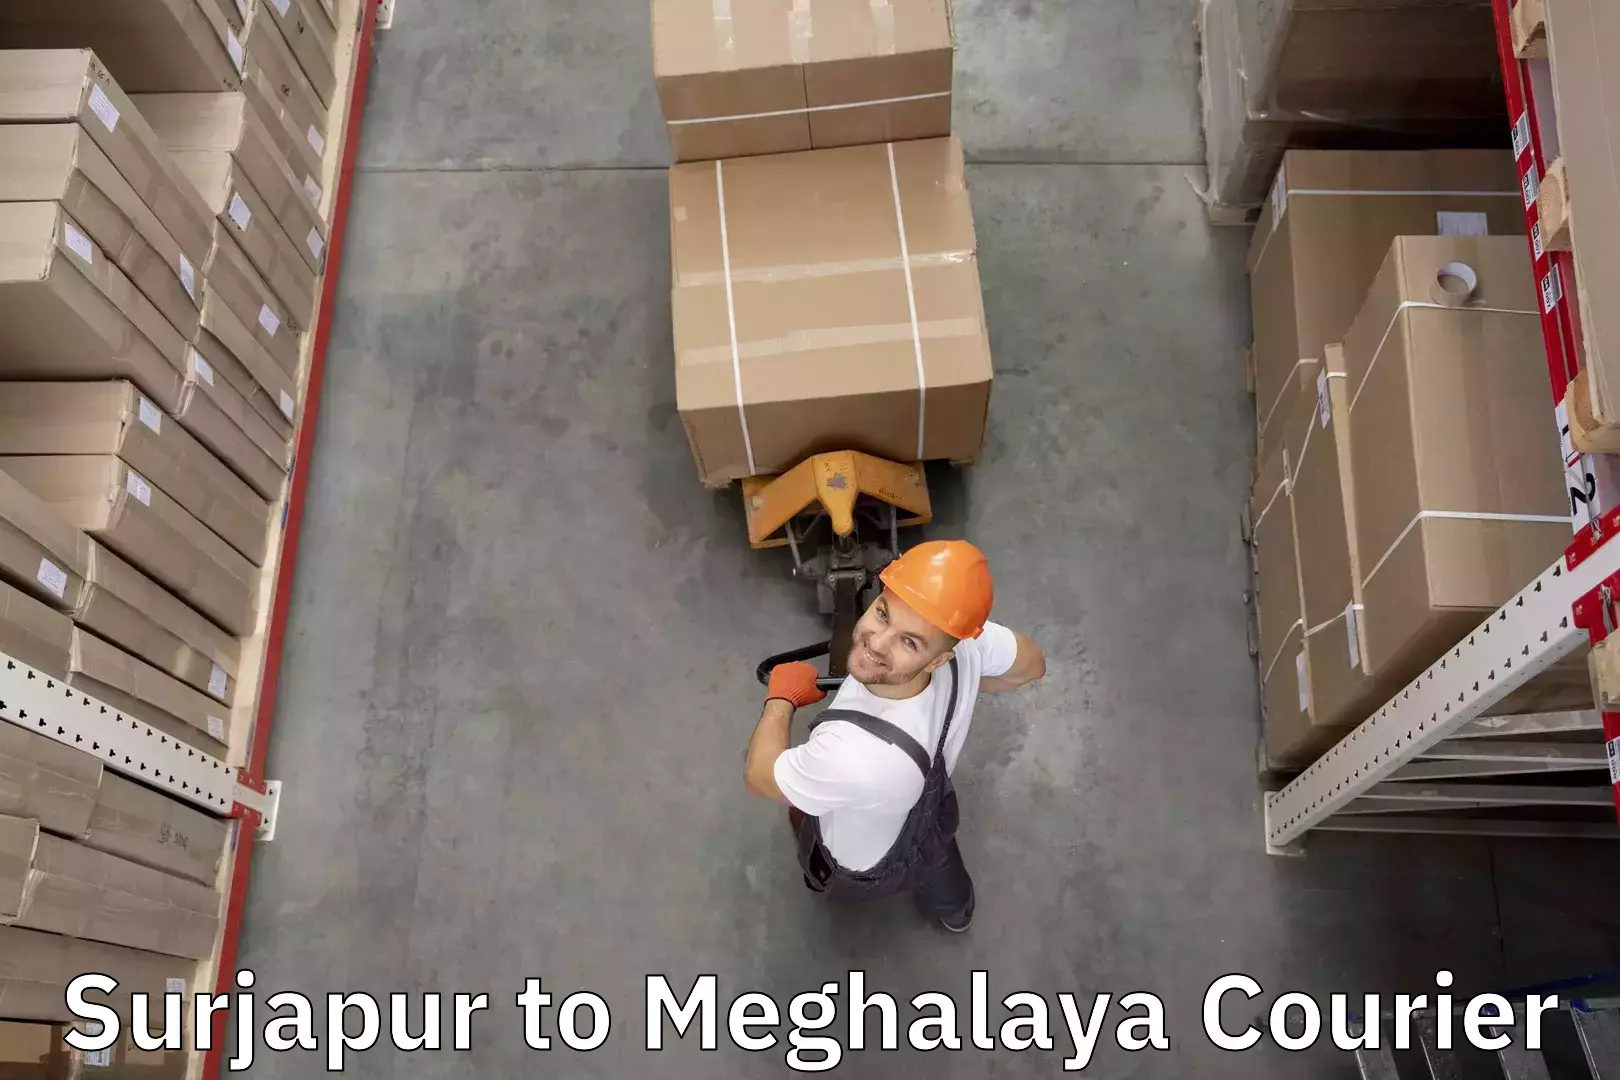 Airport luggage delivery in Surjapur to Meghalaya